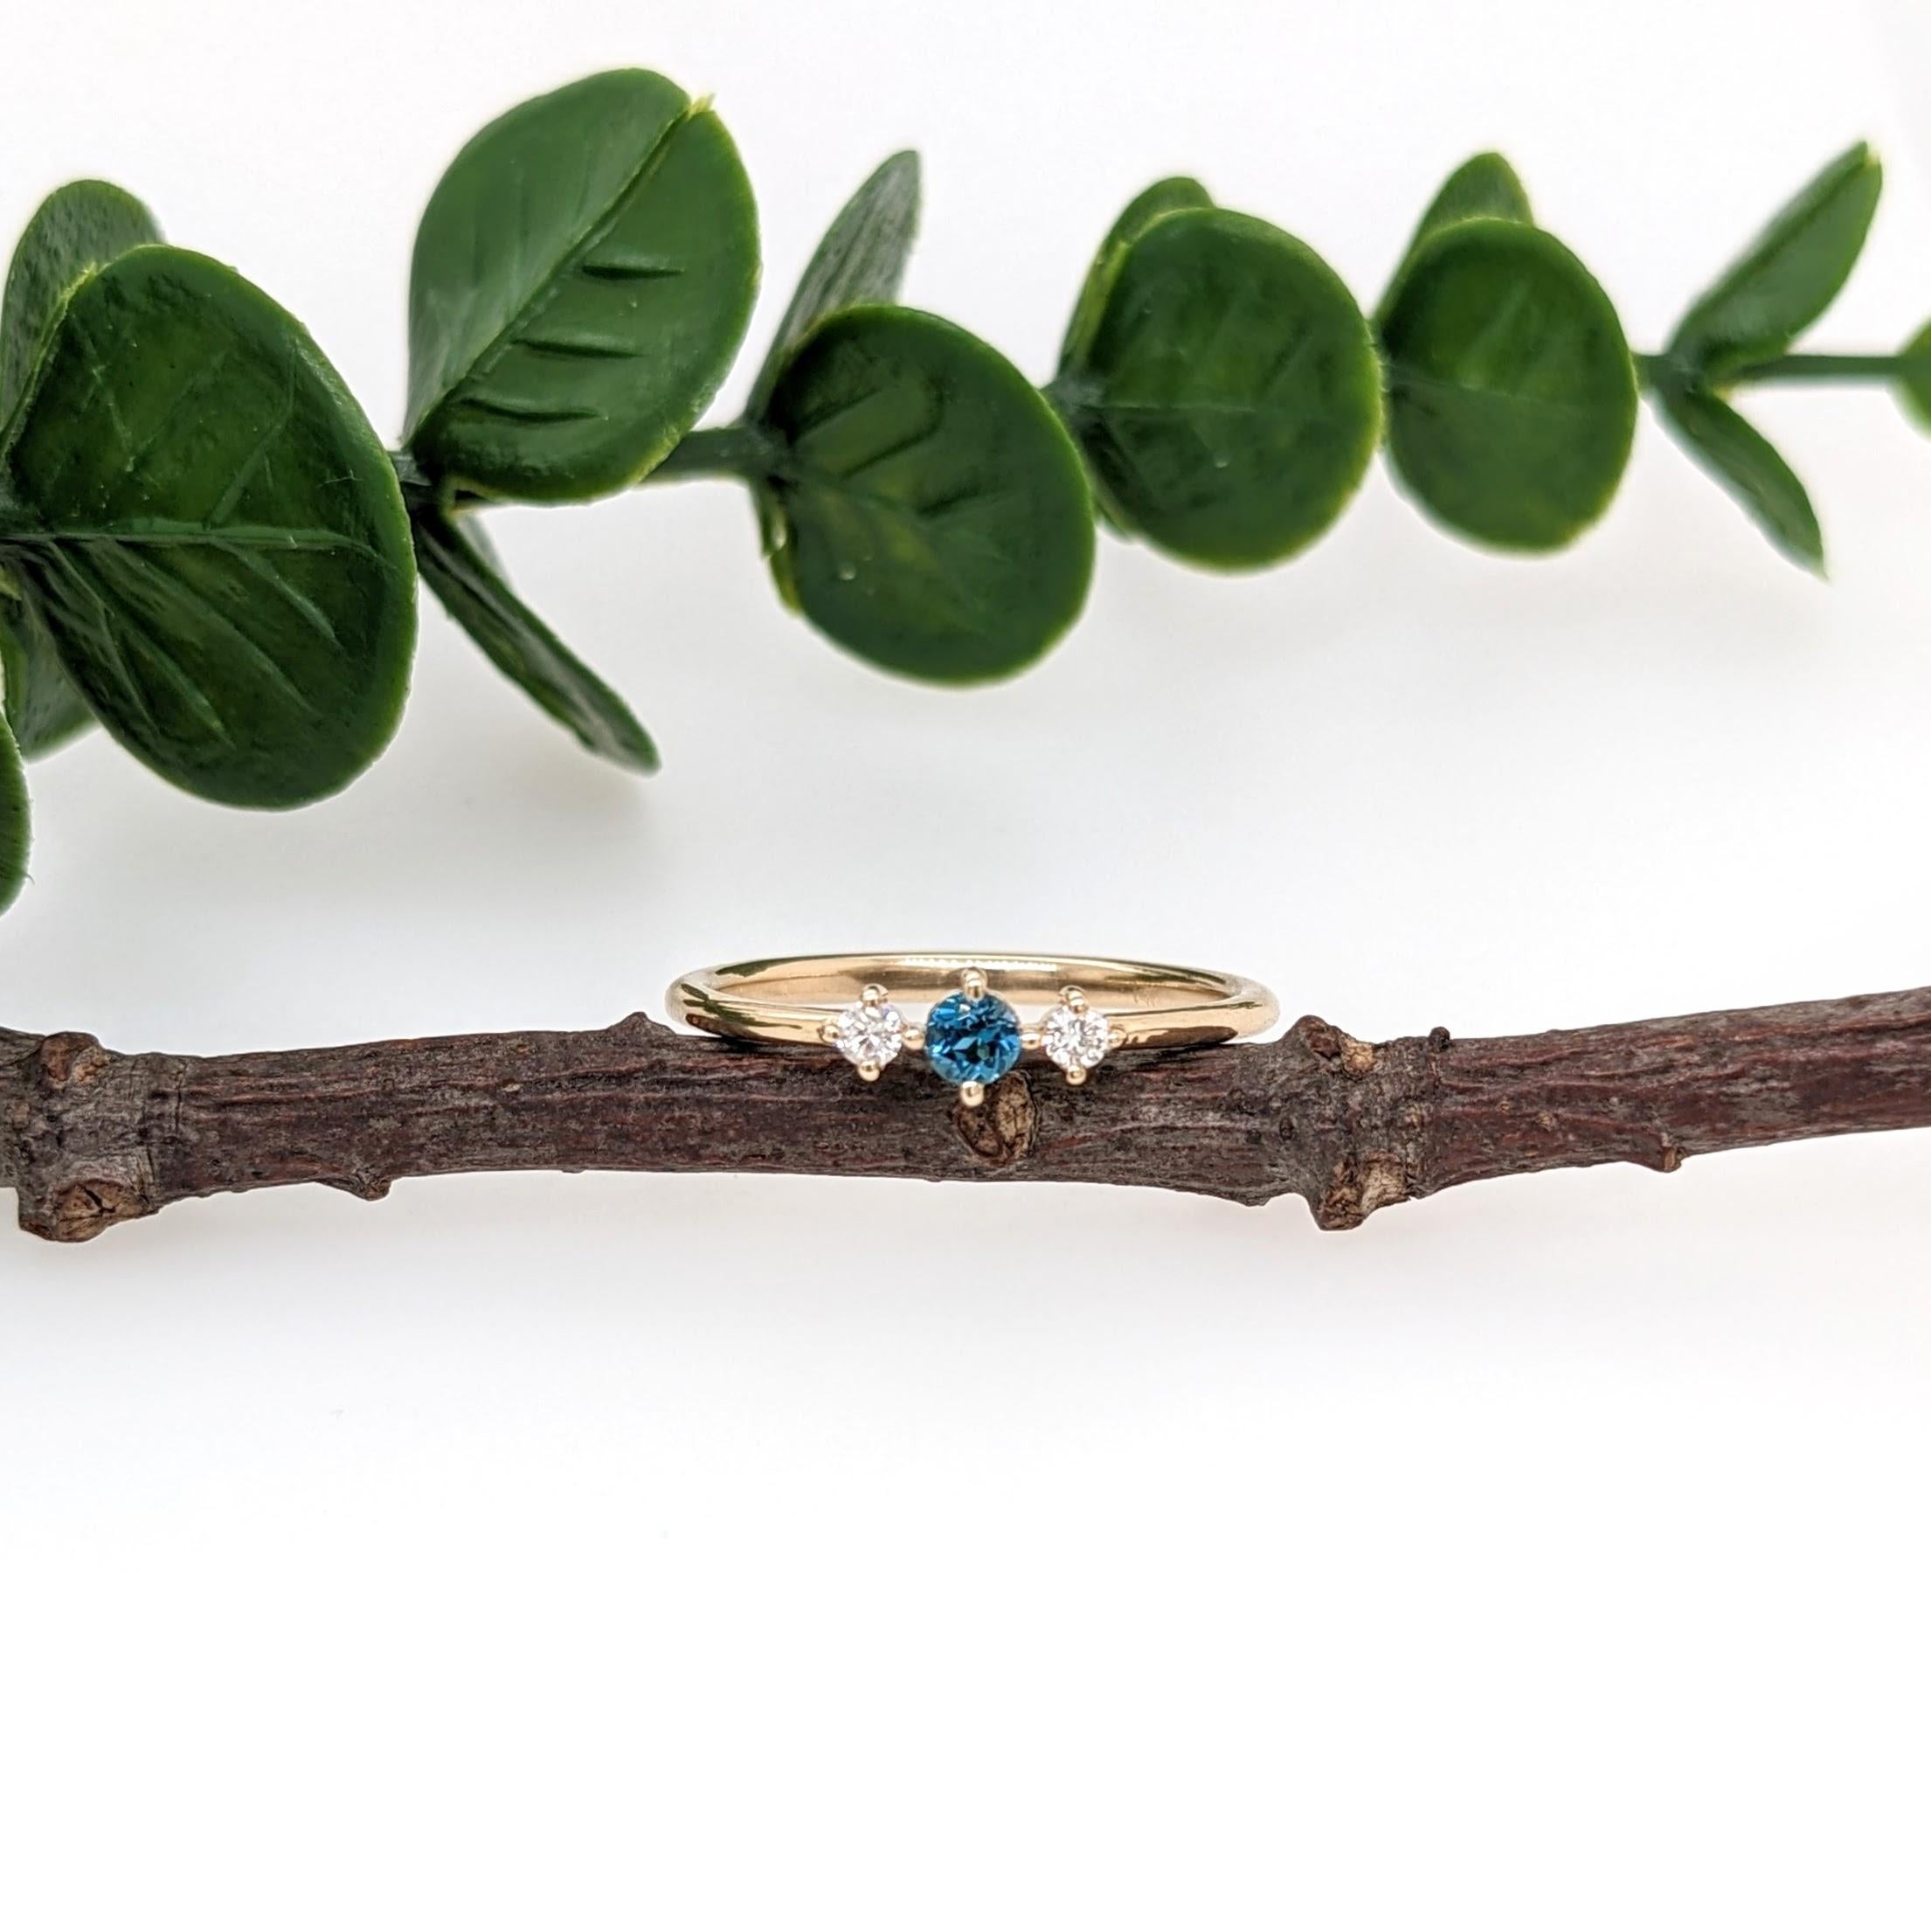 This beautiful ring features a Blue Topaz in 14k yellow Gold and two diamond accents. A dainty ring design perfect for an eye catching engagement or anniversary. This ring also makes a beautiful birthstone ring for your loved ones.

The occasions to